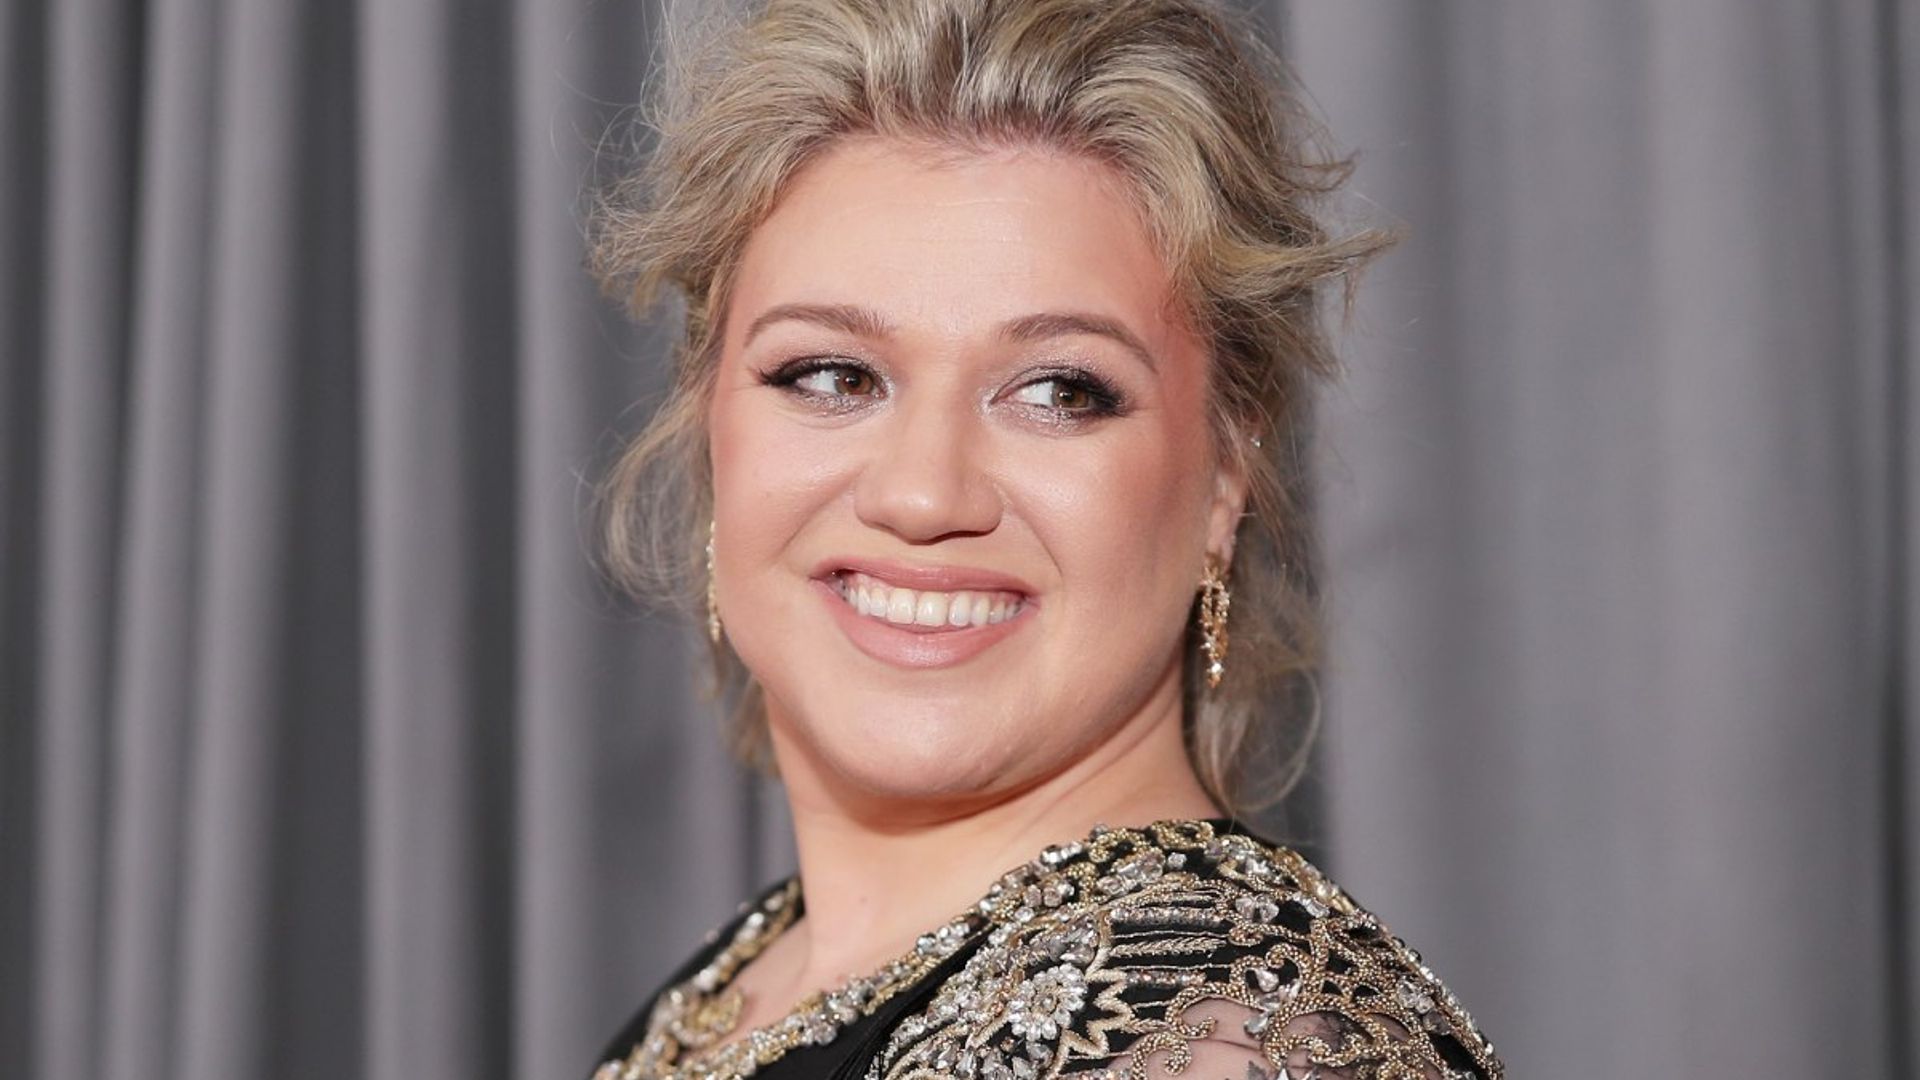 kelly clarkson bedroom photo sparks reaction